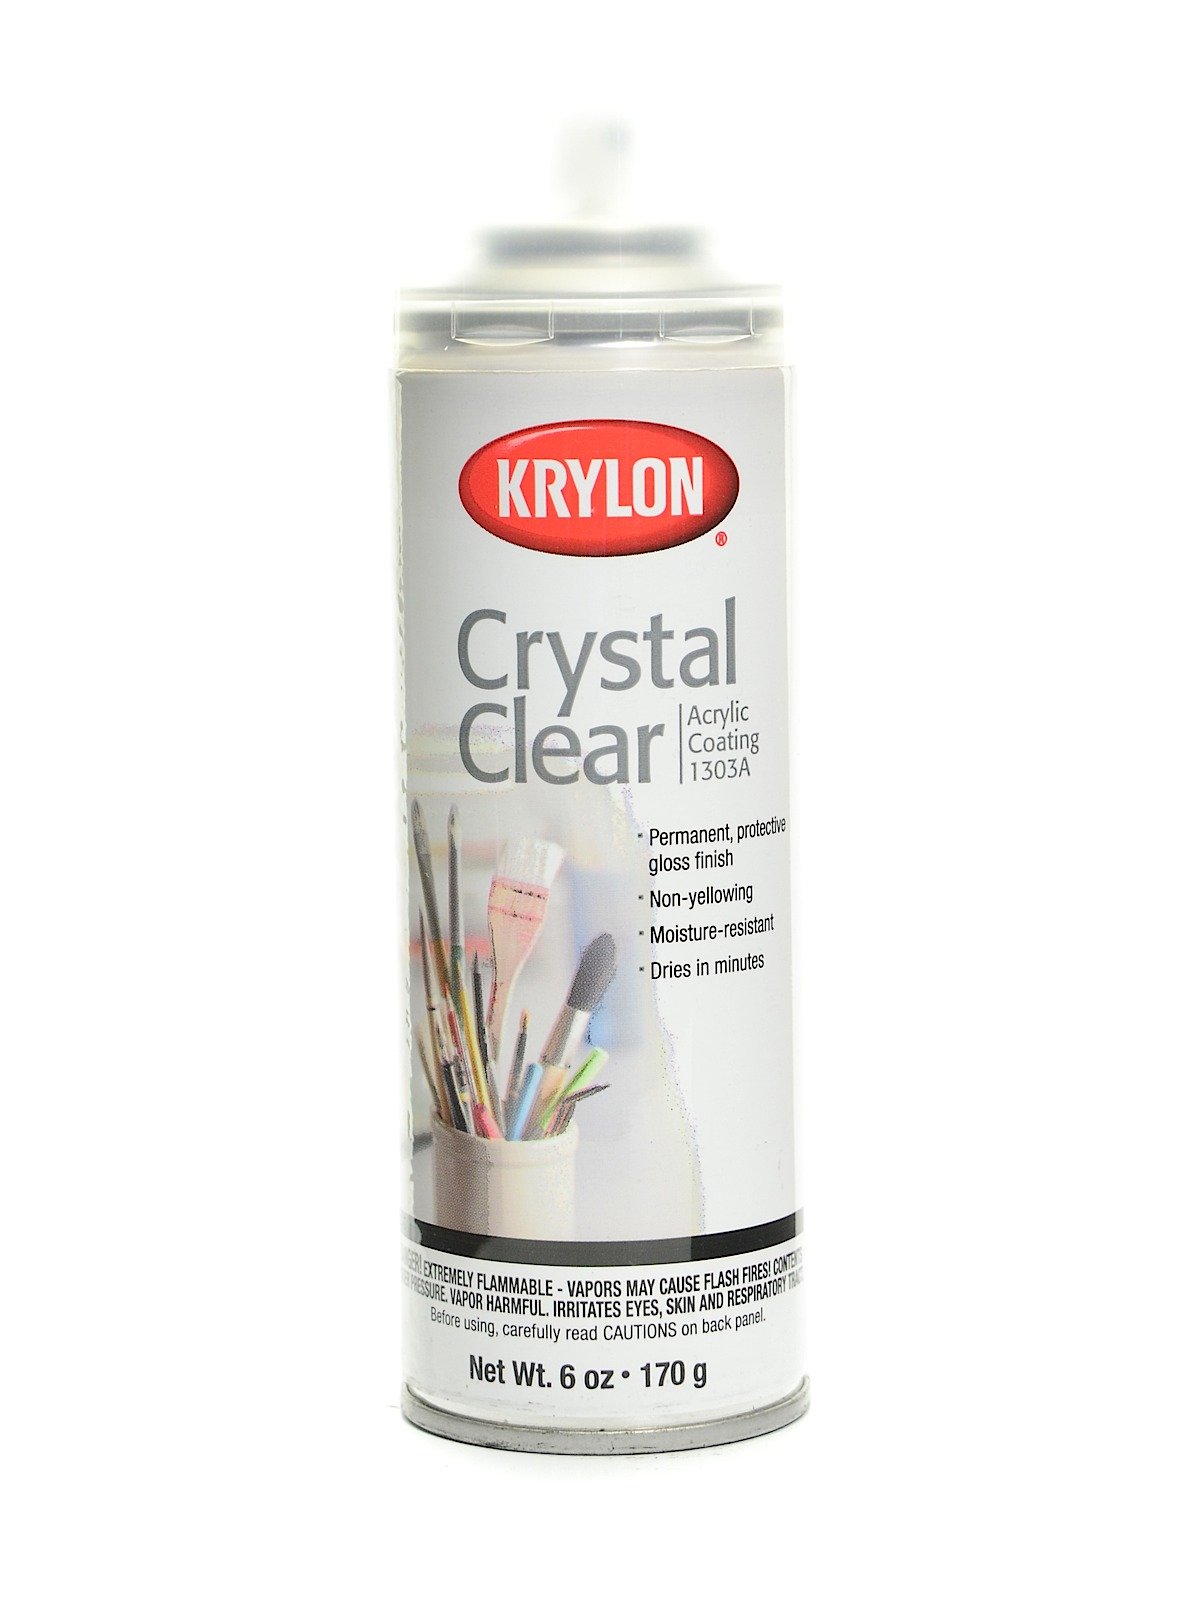 Rust-Oleum Universal High-gloss Clear Spray Paint (NET WT. 11-oz) in the  Spray Paint department at